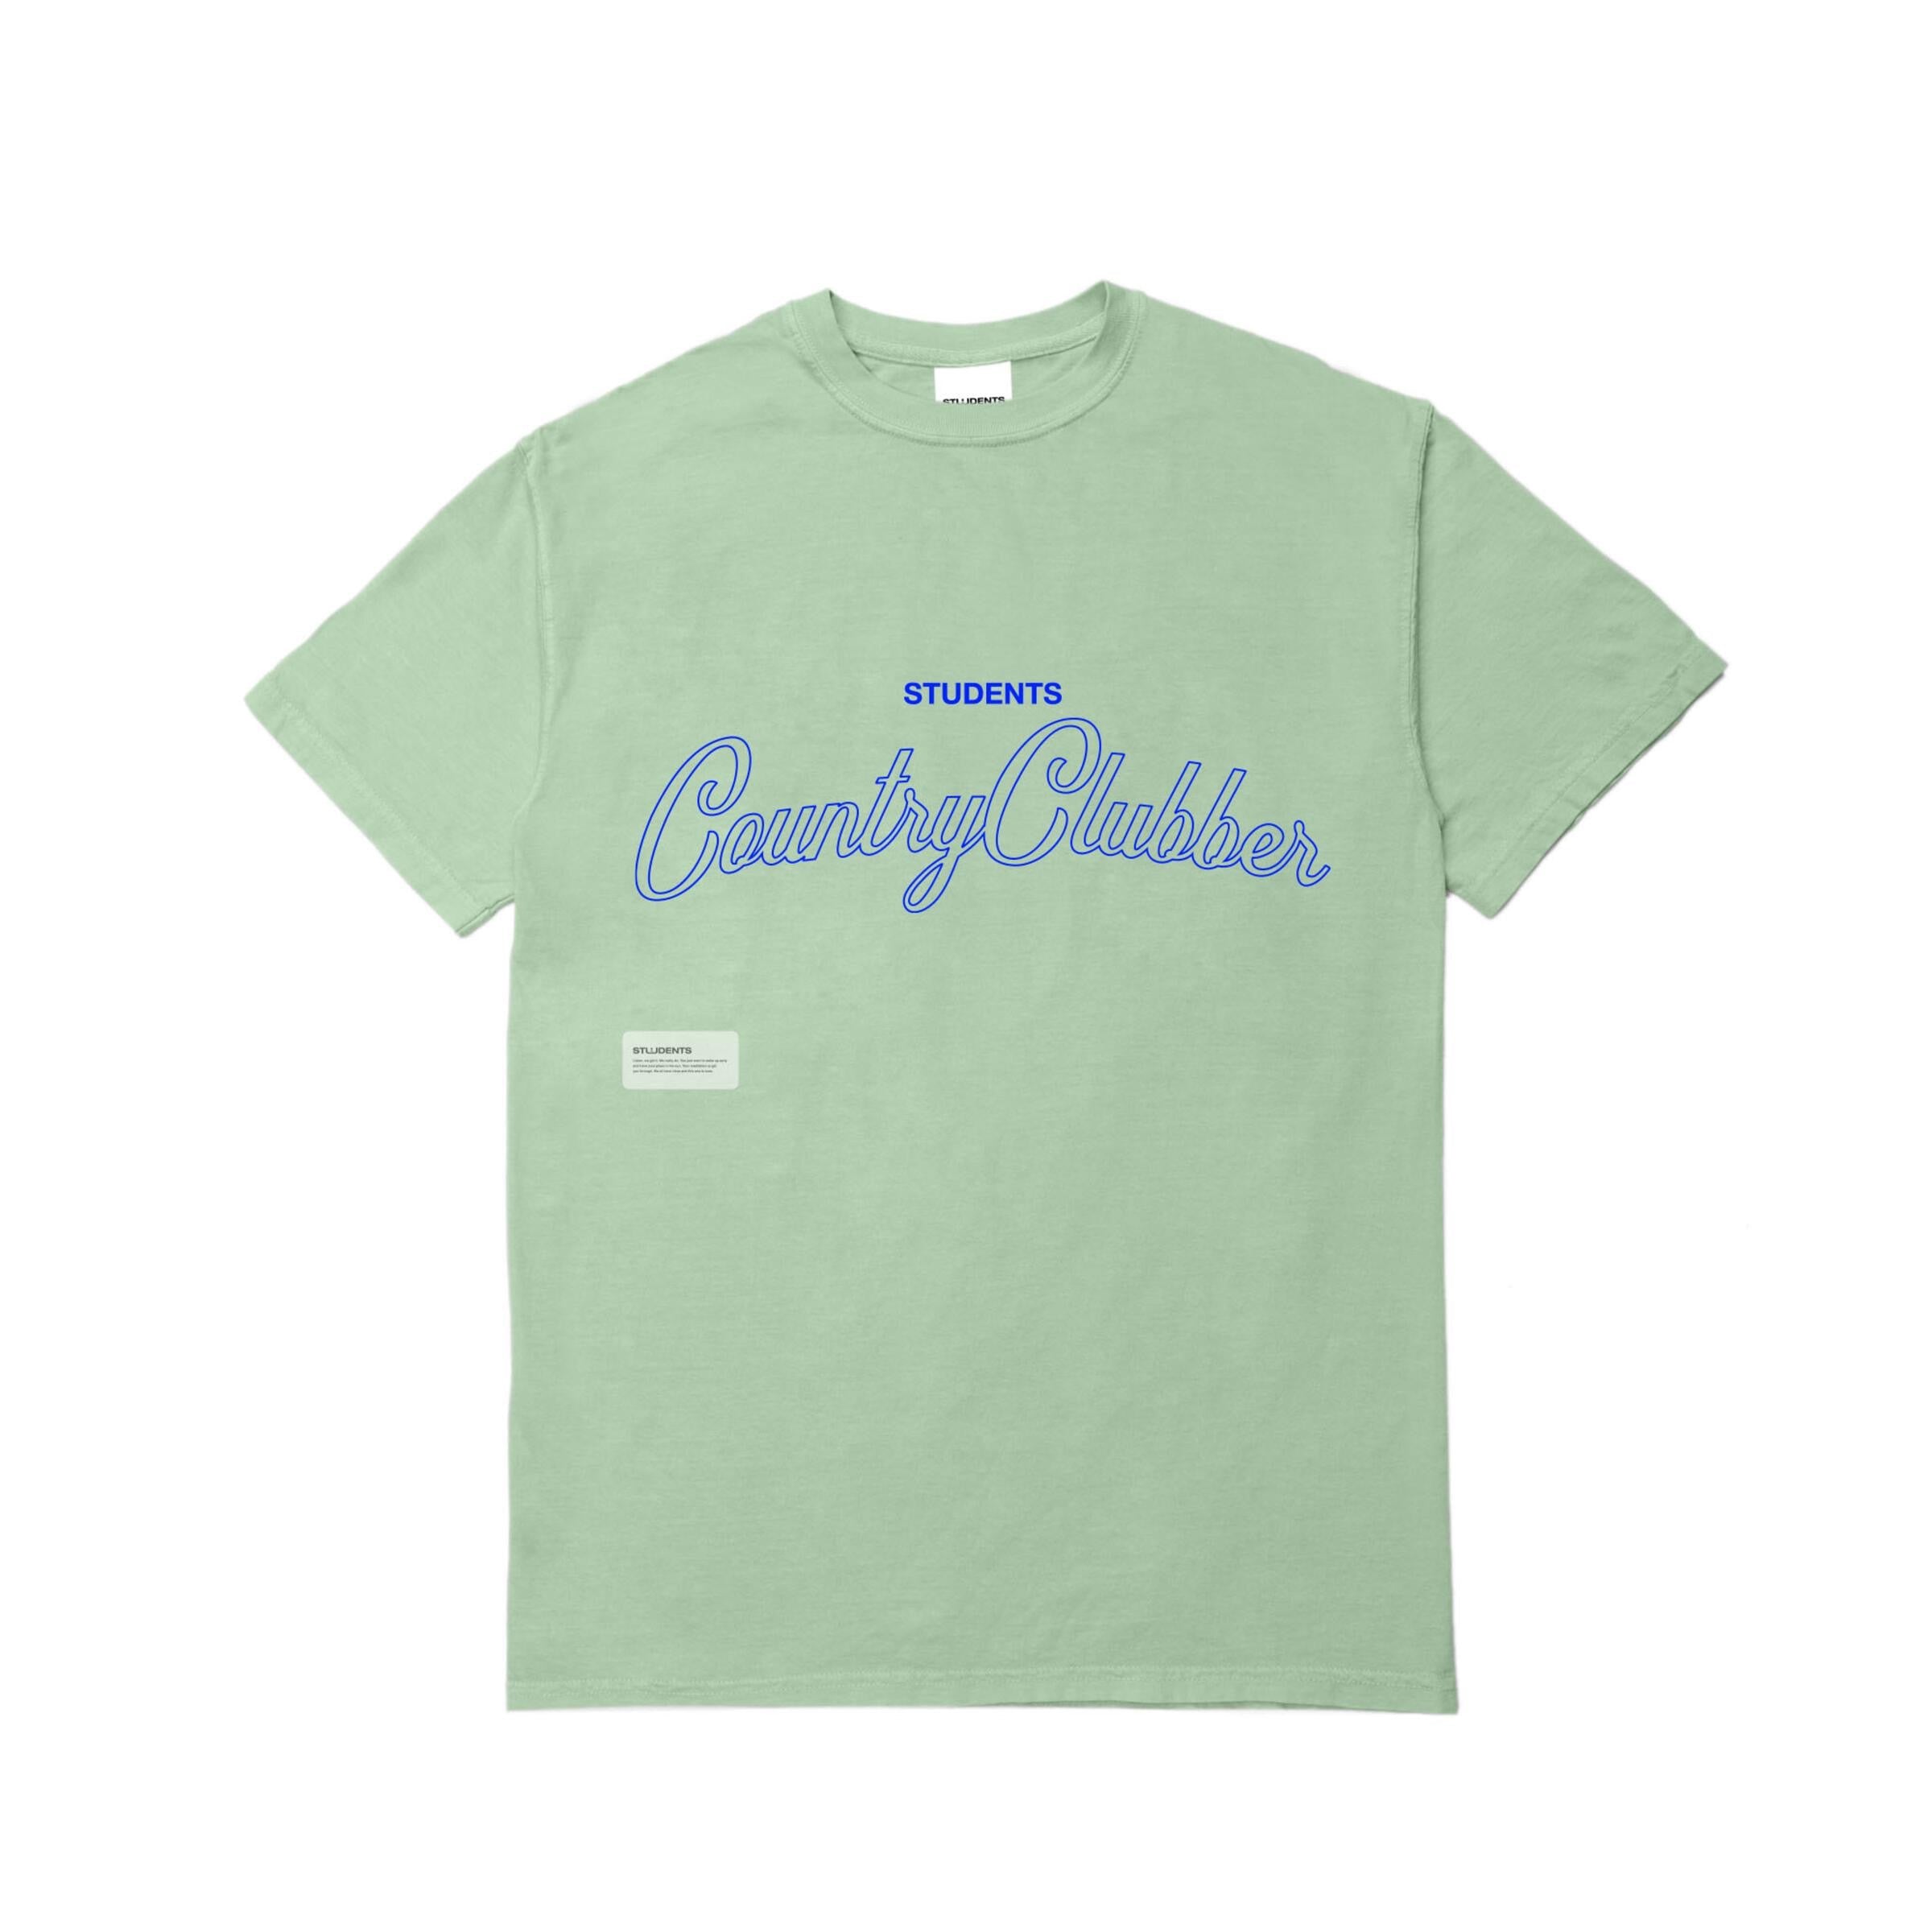 Students Country Clubber T-shirt - Peapod